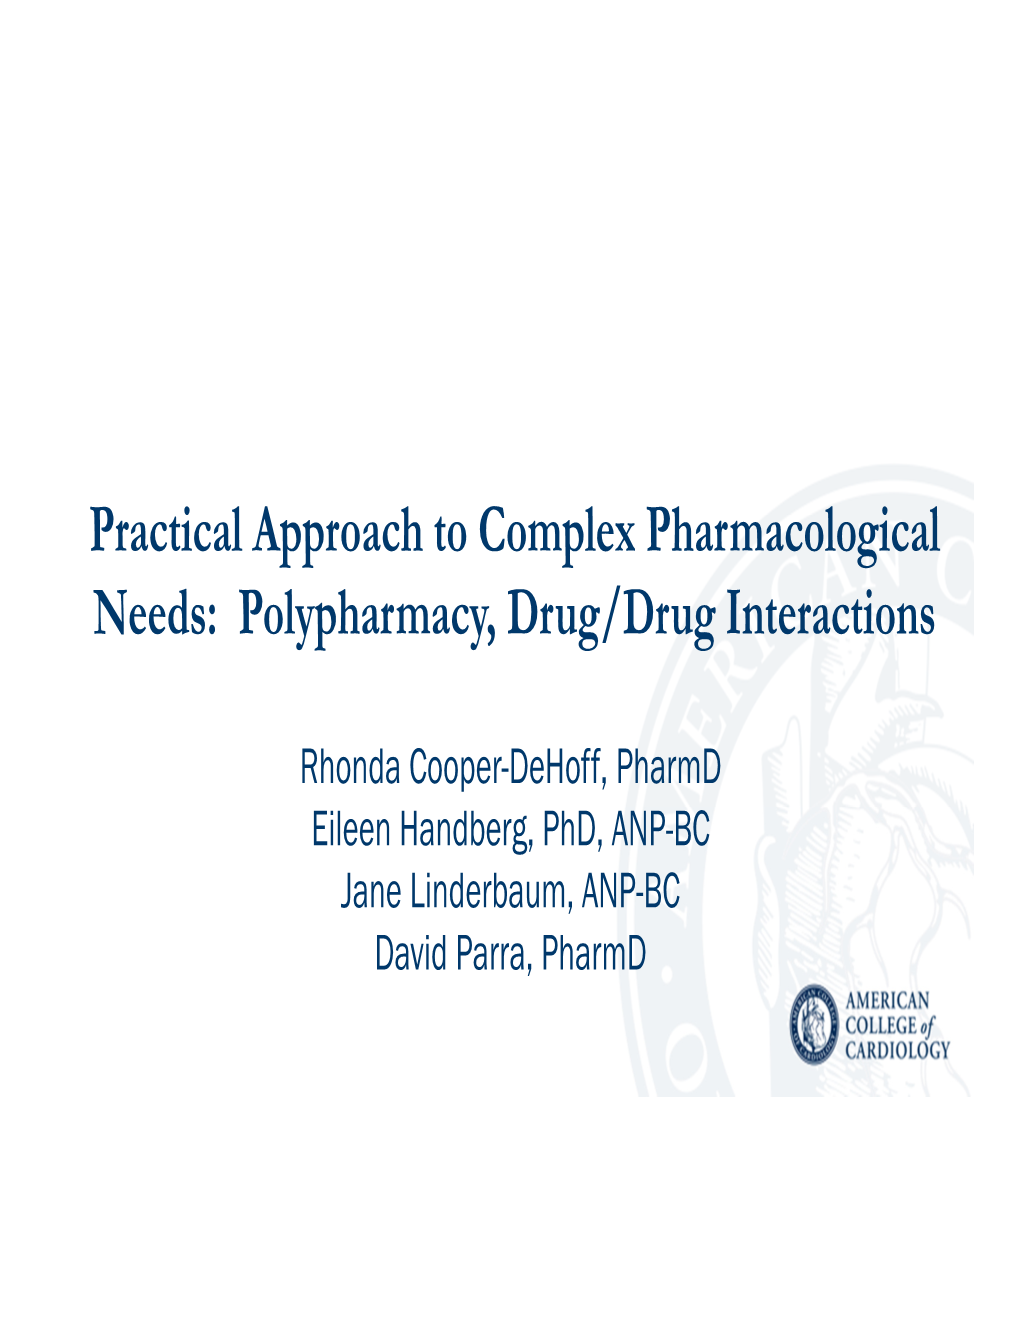 Polypharmacy, Drug/Drug Interactions